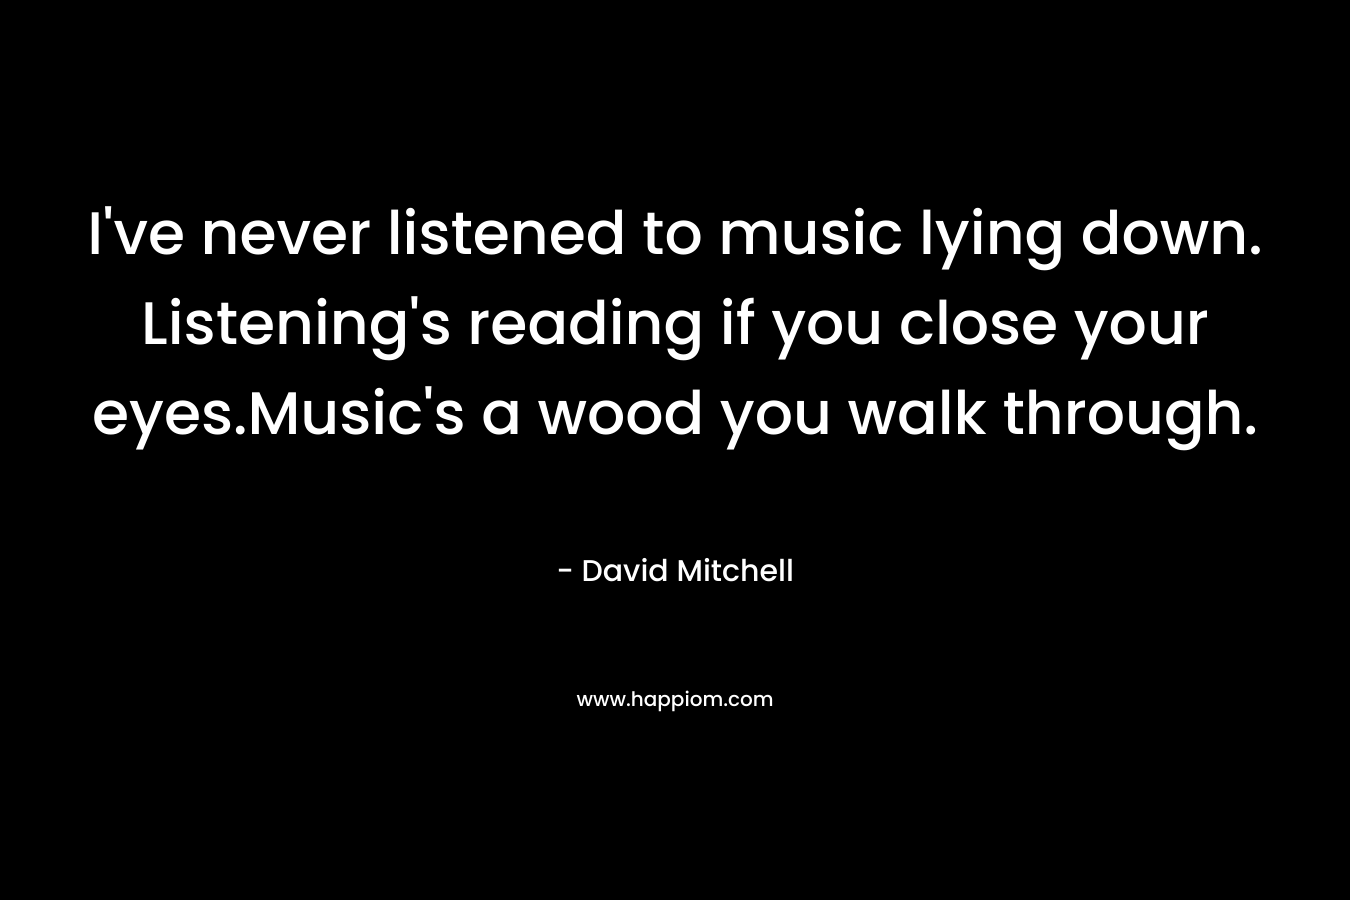 I've never listened to music lying down. Listening's reading if you close your eyes.Music's a wood you walk through.